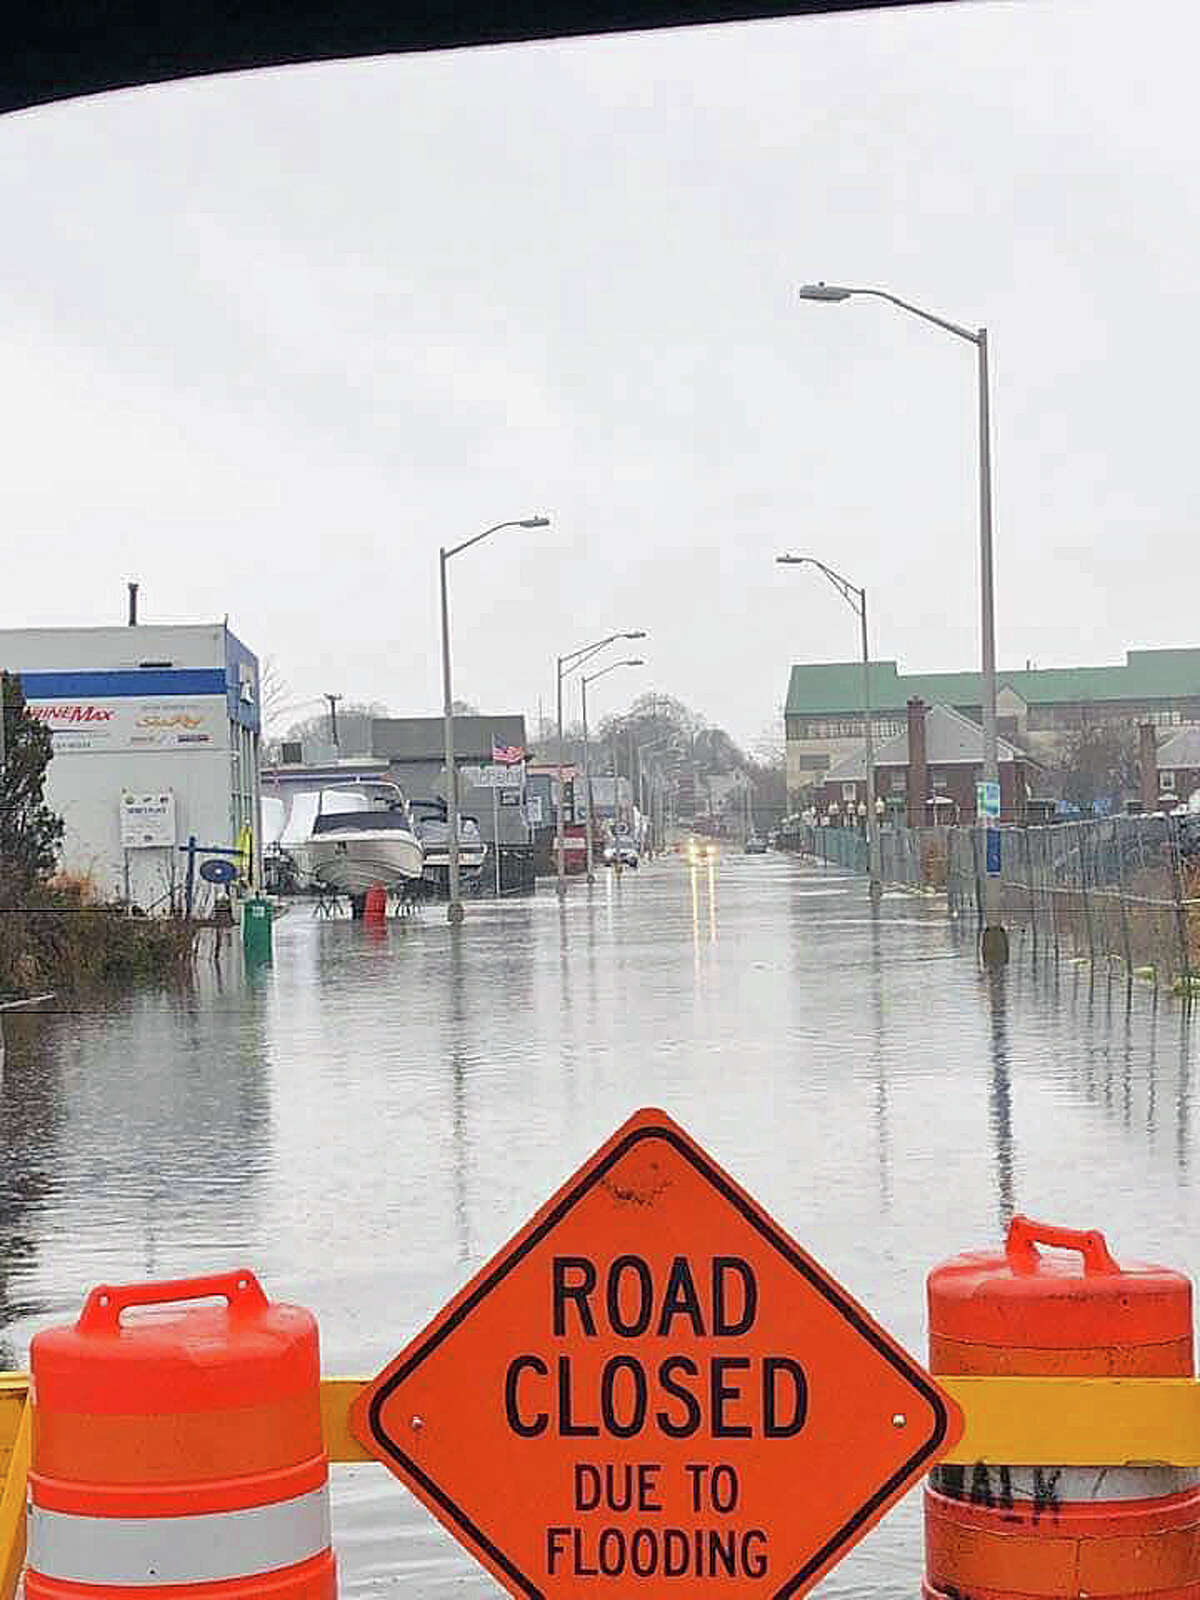 Water Street in Norwalk, Conn., was closed because of flooding on Dec. 21, 2018.